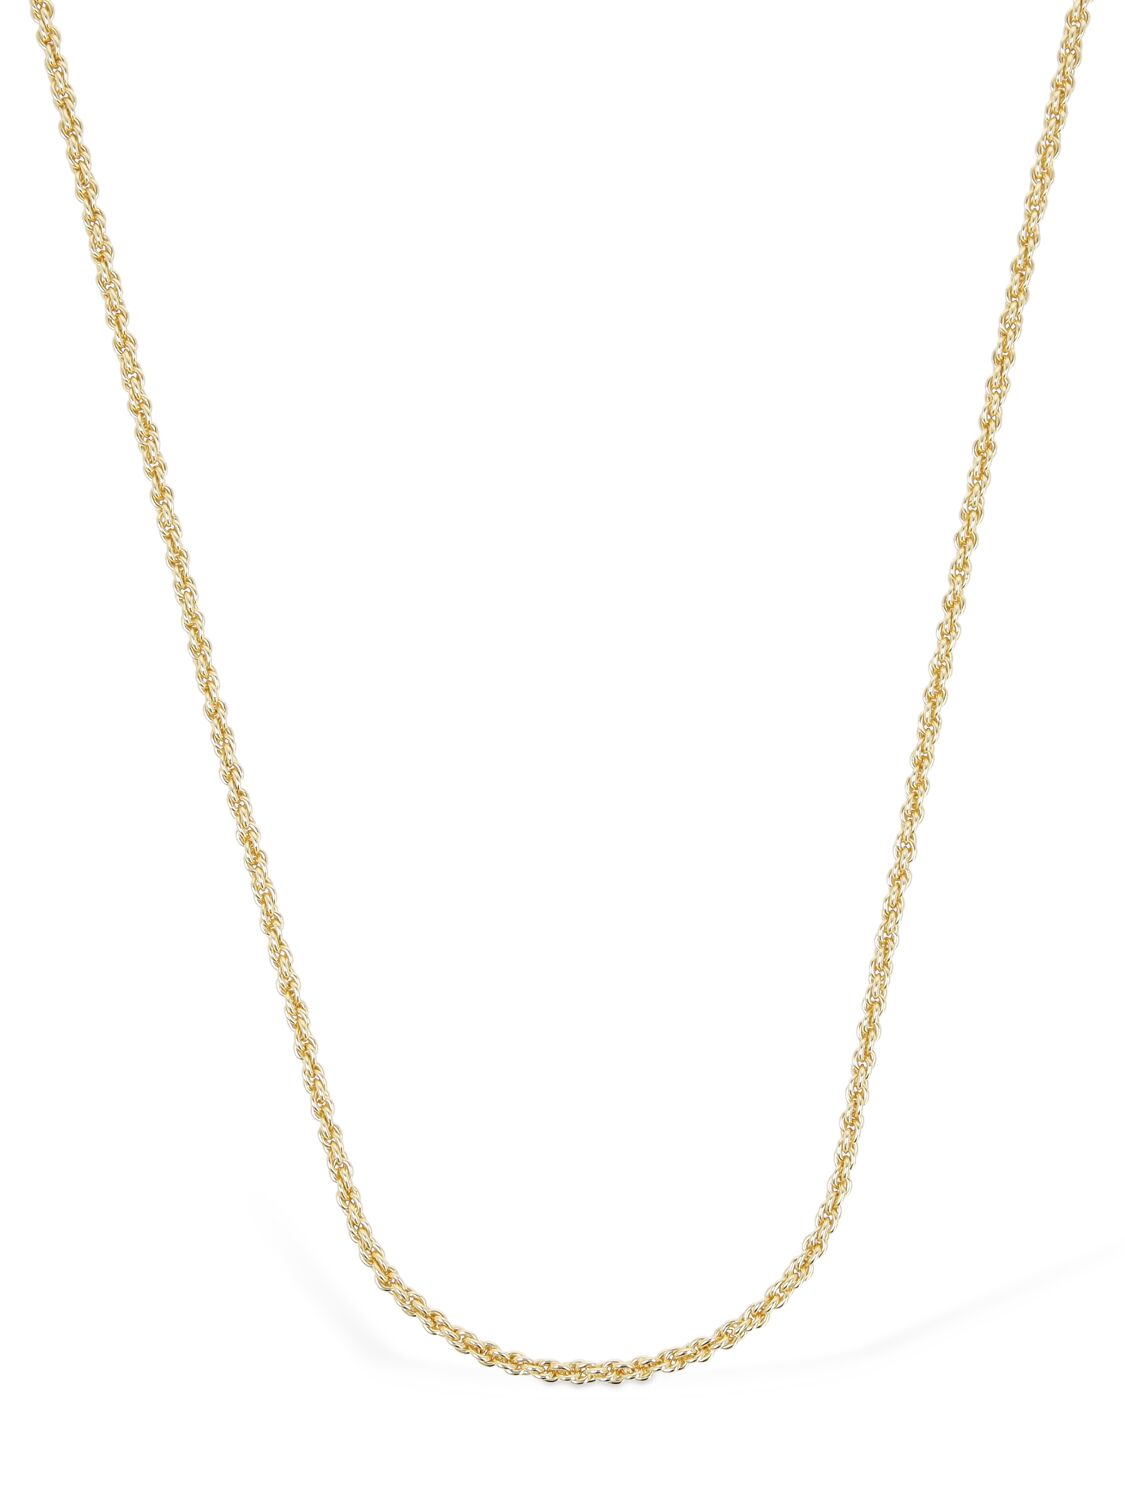 Federica Tosi Lace Grace Long Mini Chain Necklace In Gold